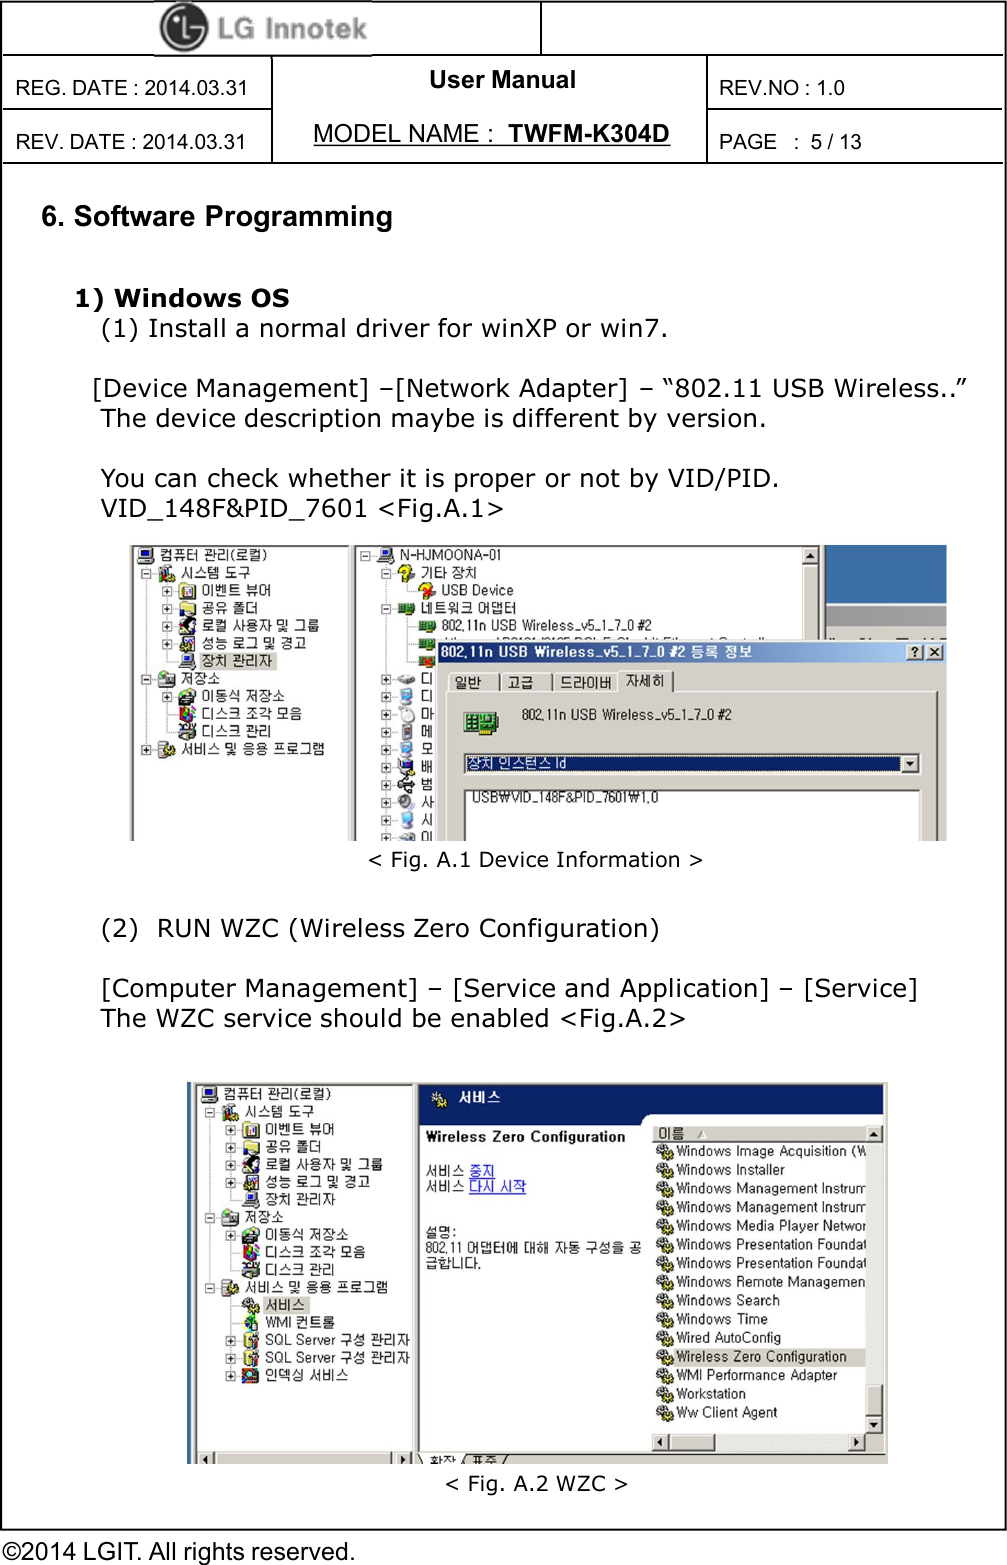 User ManualPAGE   :REG. DATE : 2014.03.31MODEL NAME : TWFM-K304DREV. DATE : 2014.03.31REV.NO : 1.0©2014 LGIT. All rights reserved.5 / 136. Software Programming1) Windows OS(1) Install a normal driver for winXP or win7.[Device Management] –[Network Adapter] – “802.11 USB Wireless..”The device description maybe is different by version.You can check whether it is proper or not by VID/PID.VID_148F&amp;PID_7601 &lt;Fig.A.1&gt; (2)  RUN WZC (Wireless Zero Configuration)[Computer Management] – [Service and Application] – [Service]The WZC service should be enabled &lt;Fig.A.2&gt;&lt; Fig. A.1 Device Information &gt;&lt; Fig. A.2 WZC &gt;